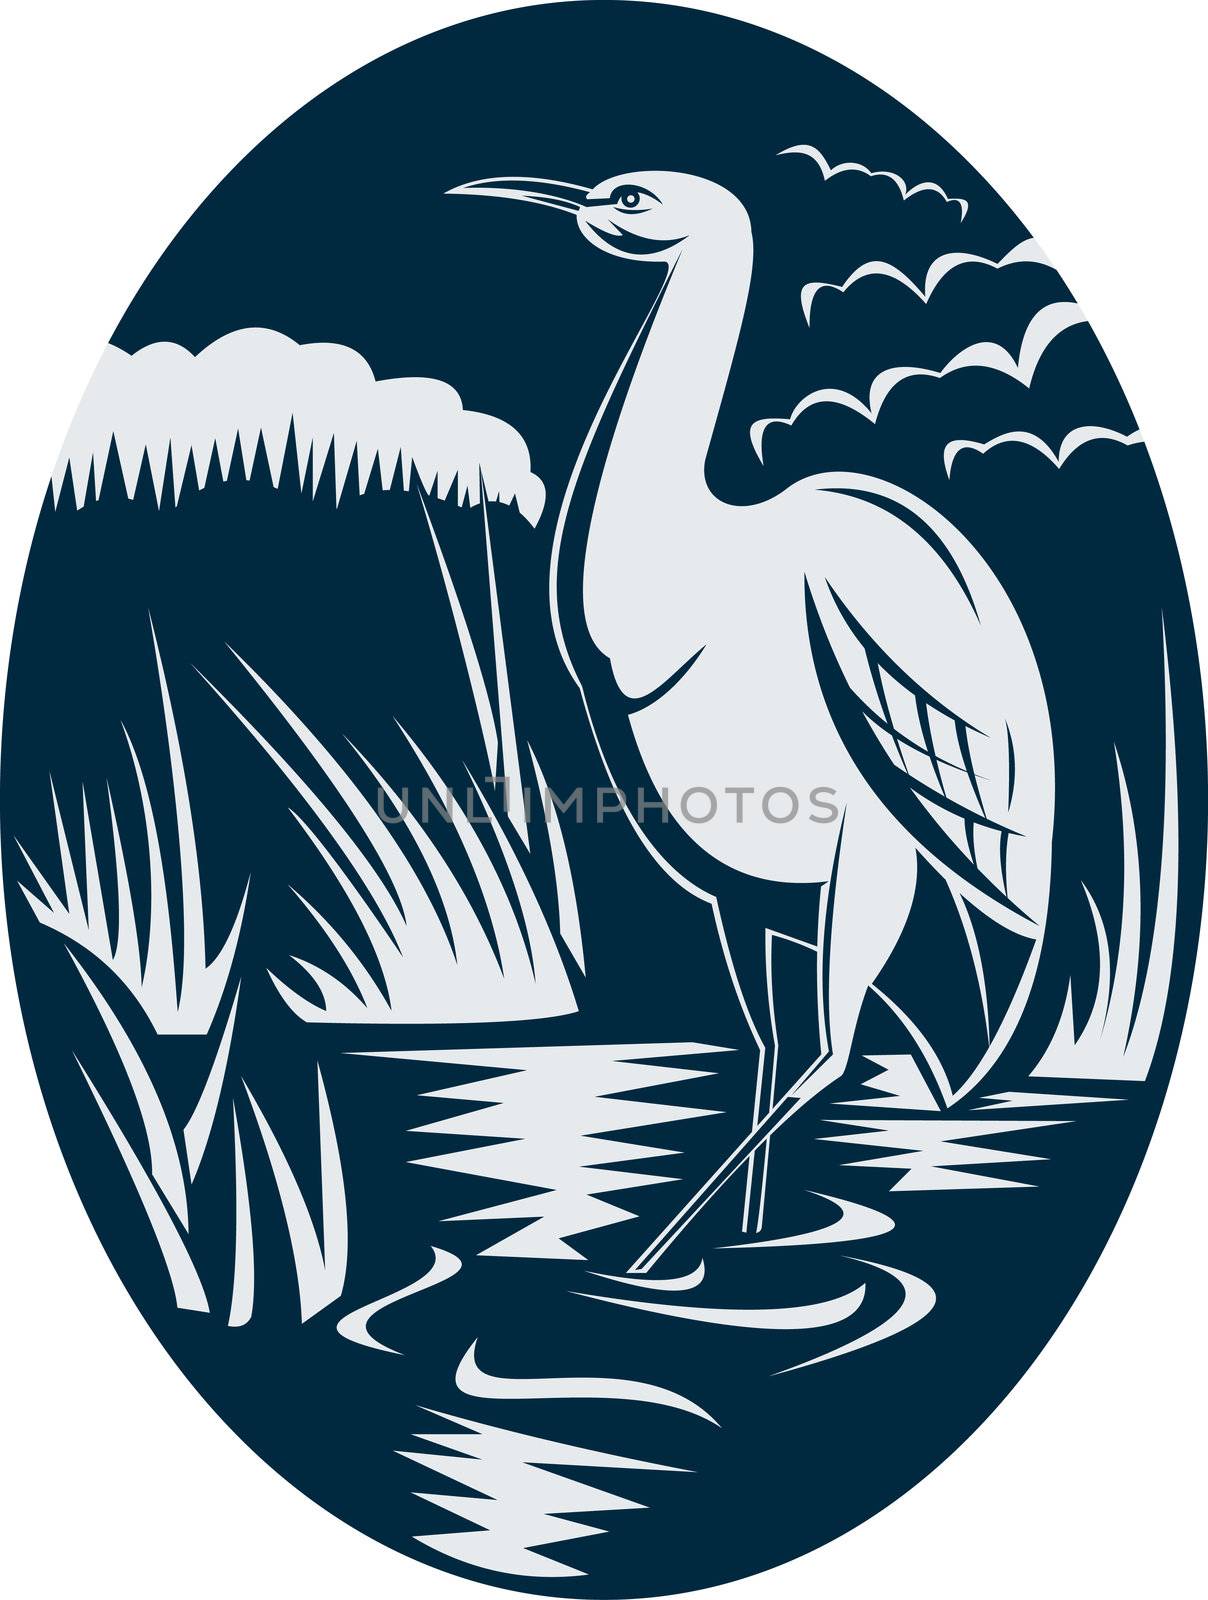 illustration of a Heron wading in the marsh or swamp done in retro woodcut style.